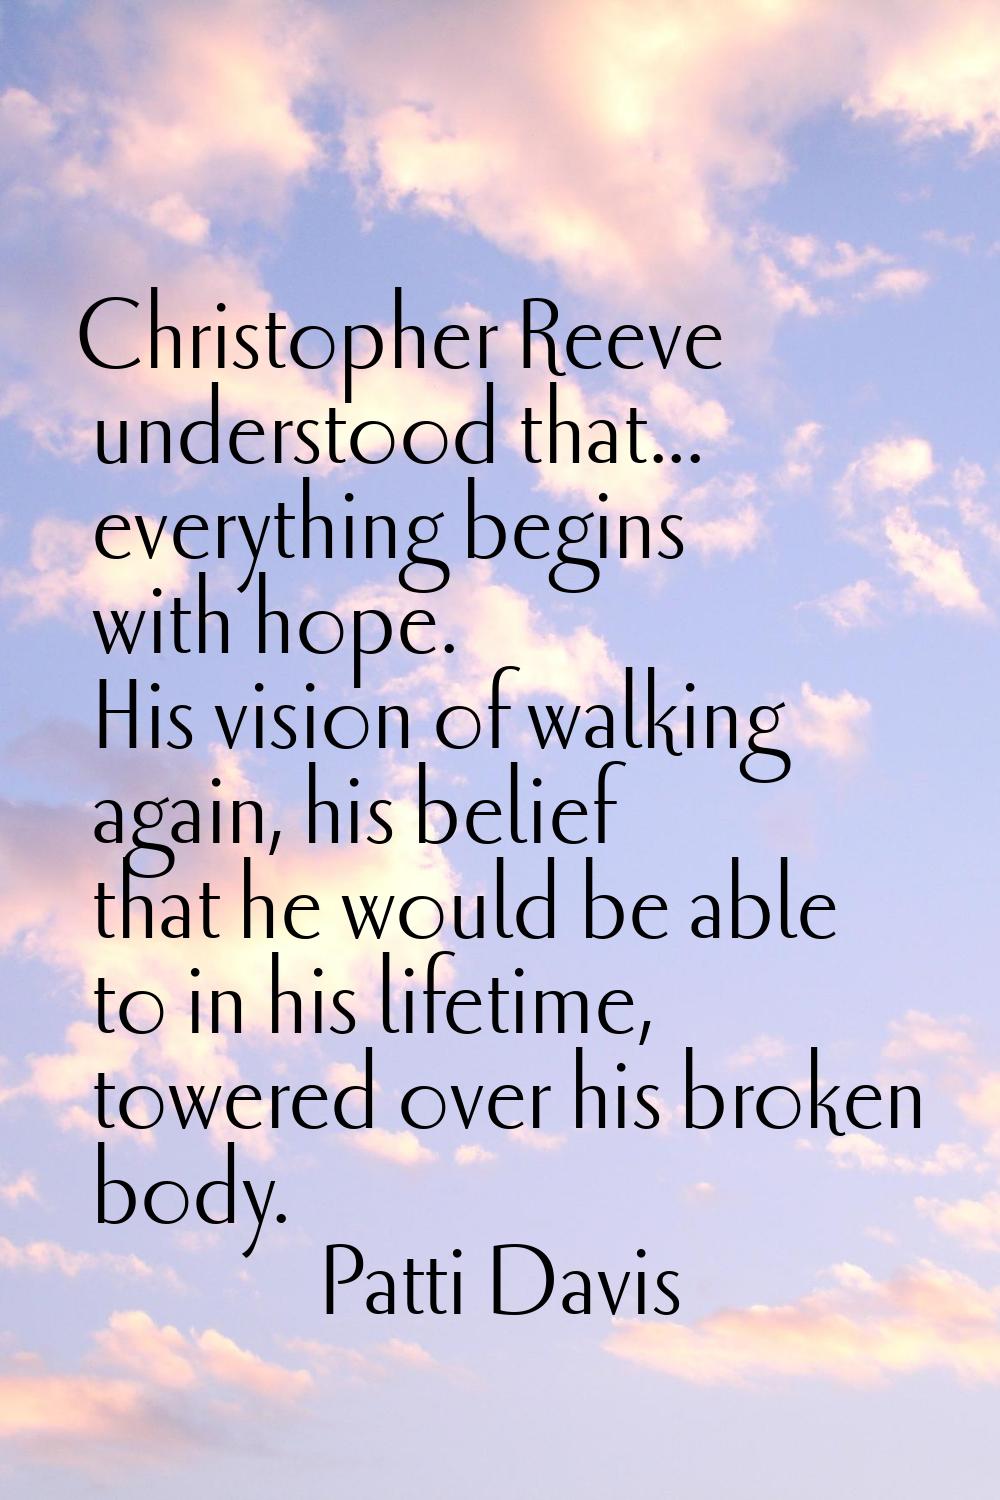 Christopher Reeve understood that... everything begins with hope. His vision of walking again, his 